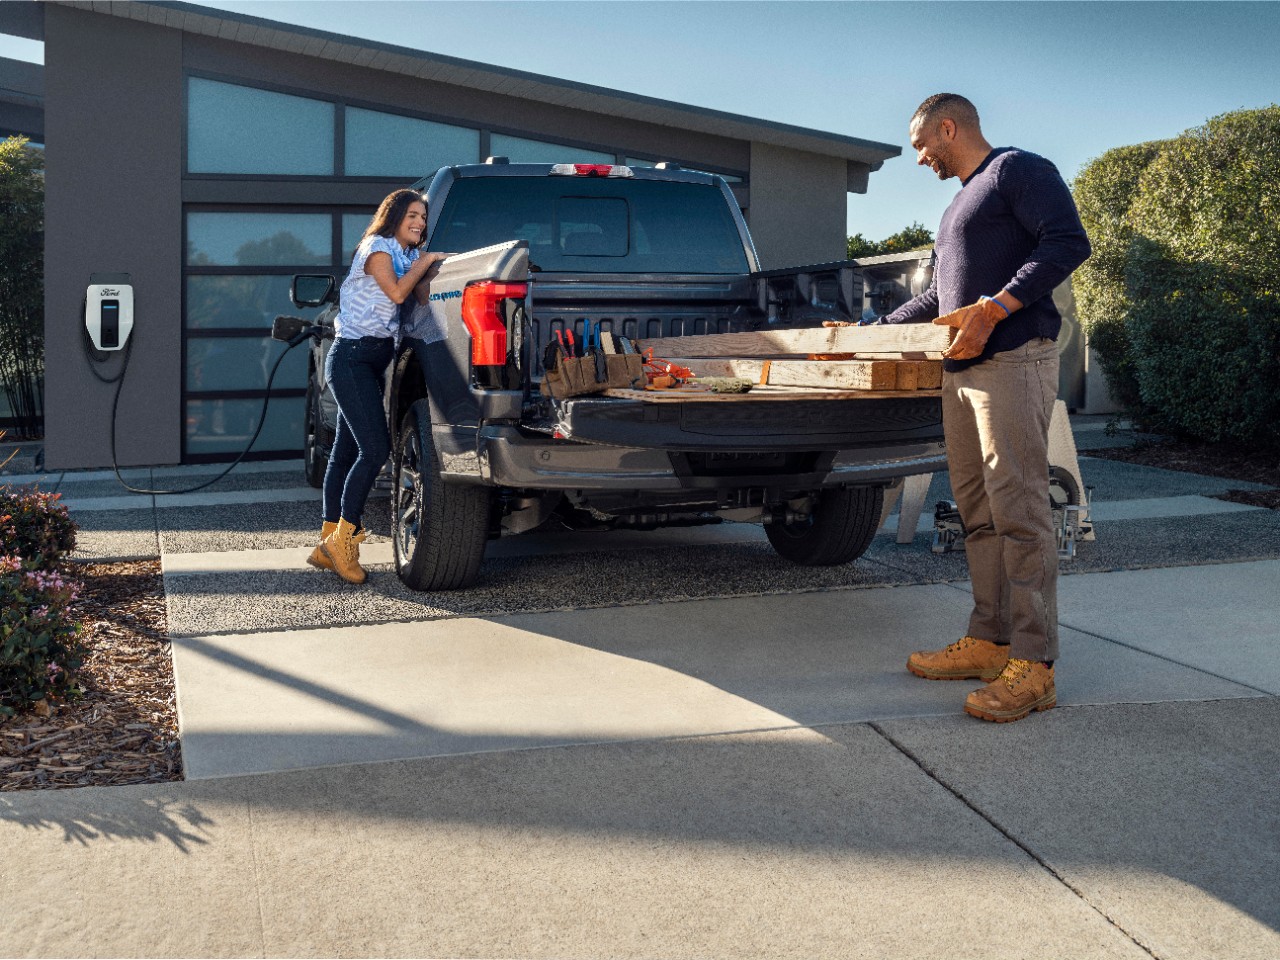 F-150 Lightning Delivers More Horsepower, More Payload Capacity, More Range